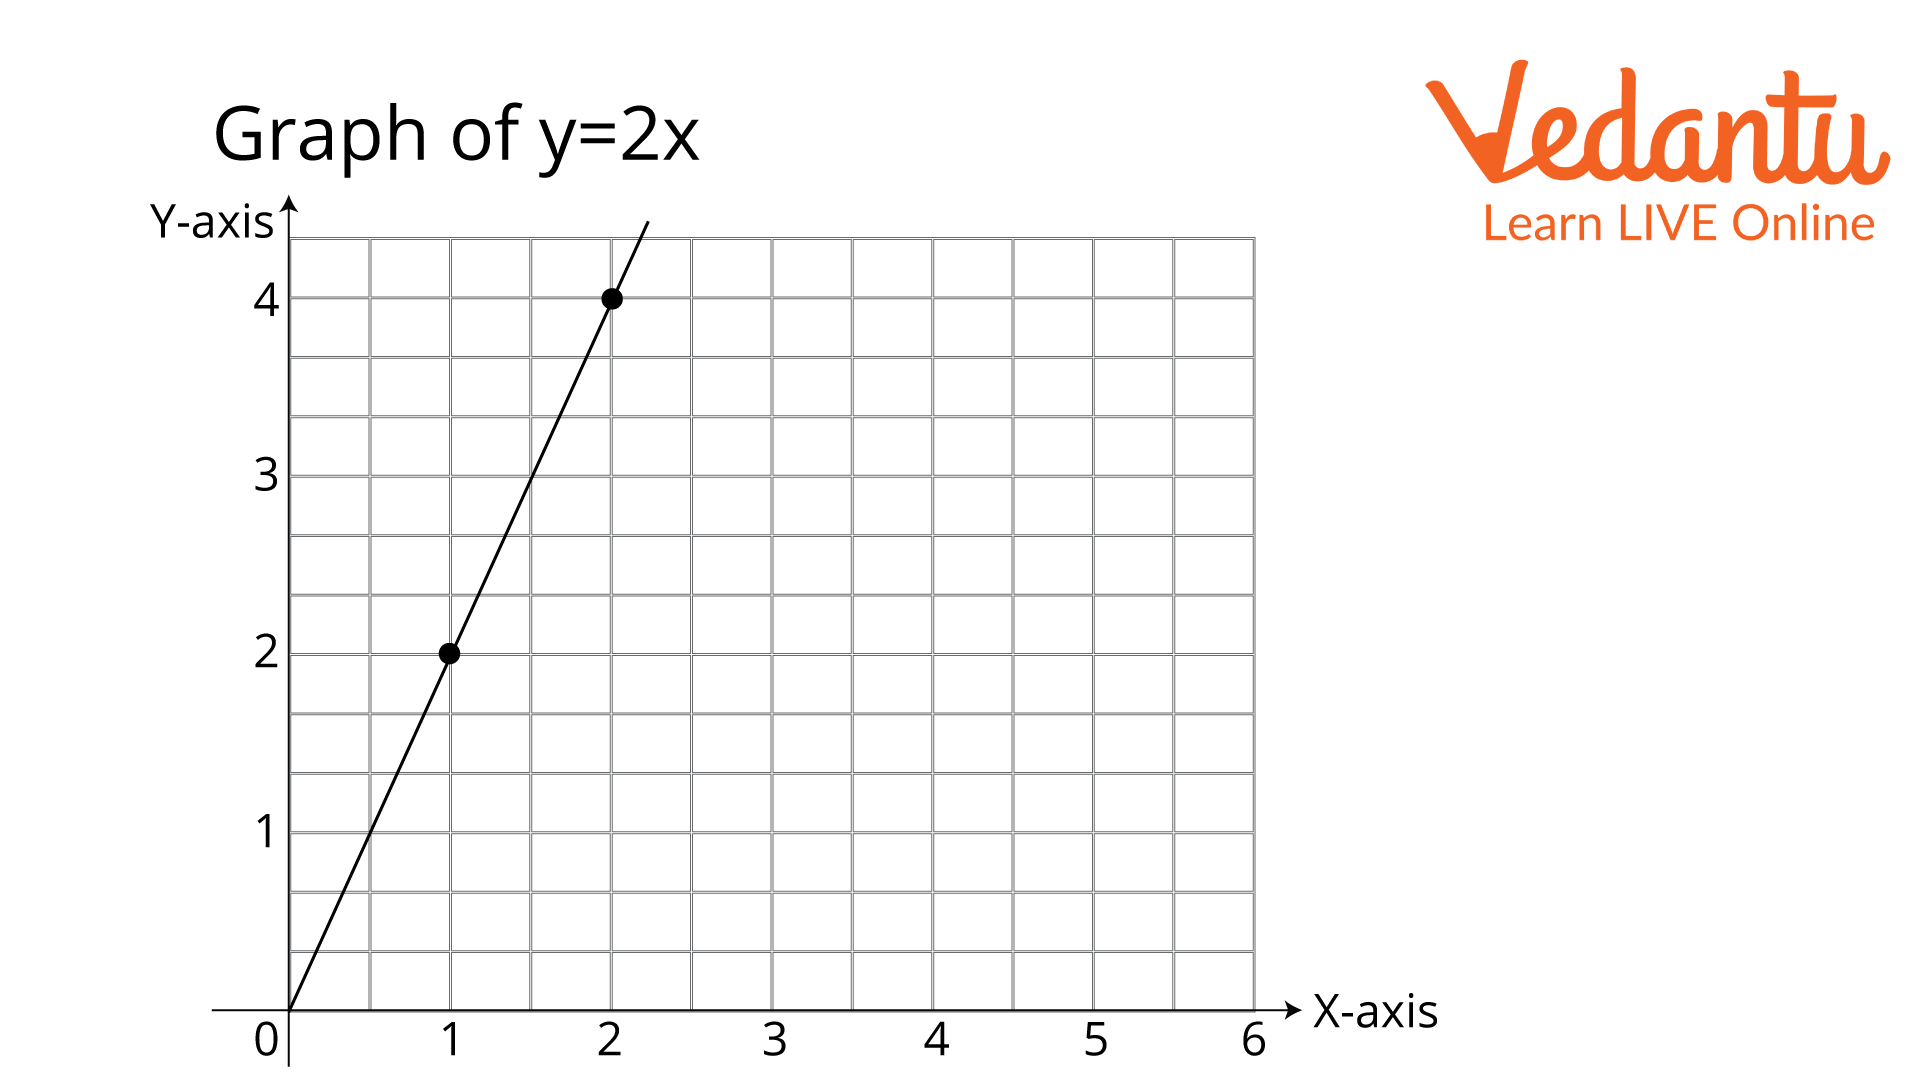 Graph of y=2x (self-made)